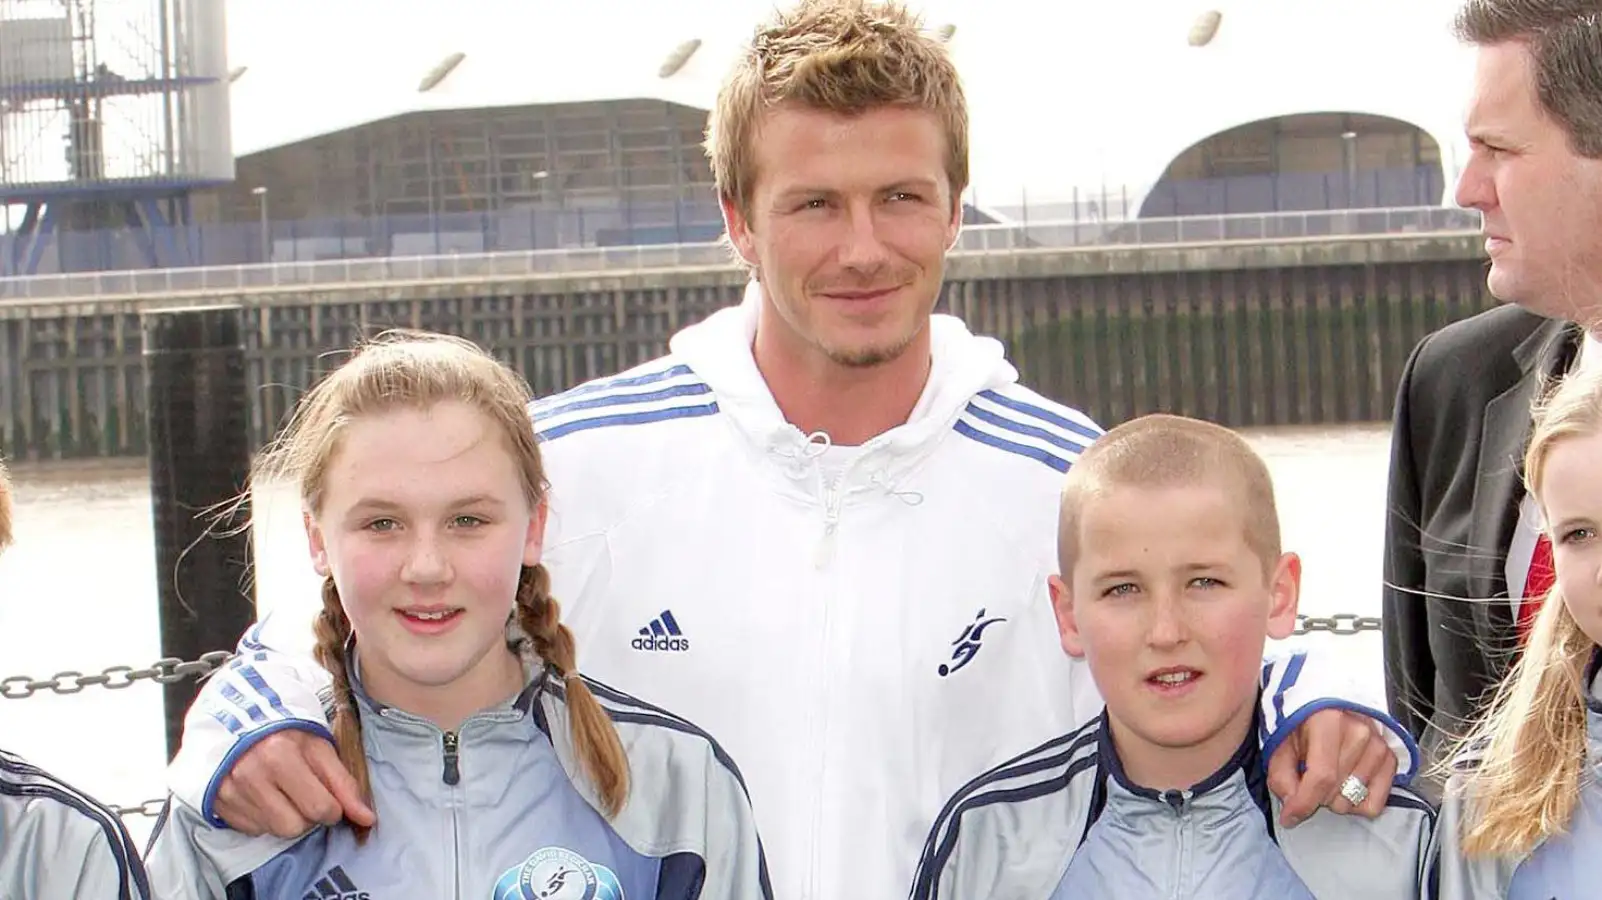 A young Harry Kane at the launch of the David Beckham Football Academy in 2005.